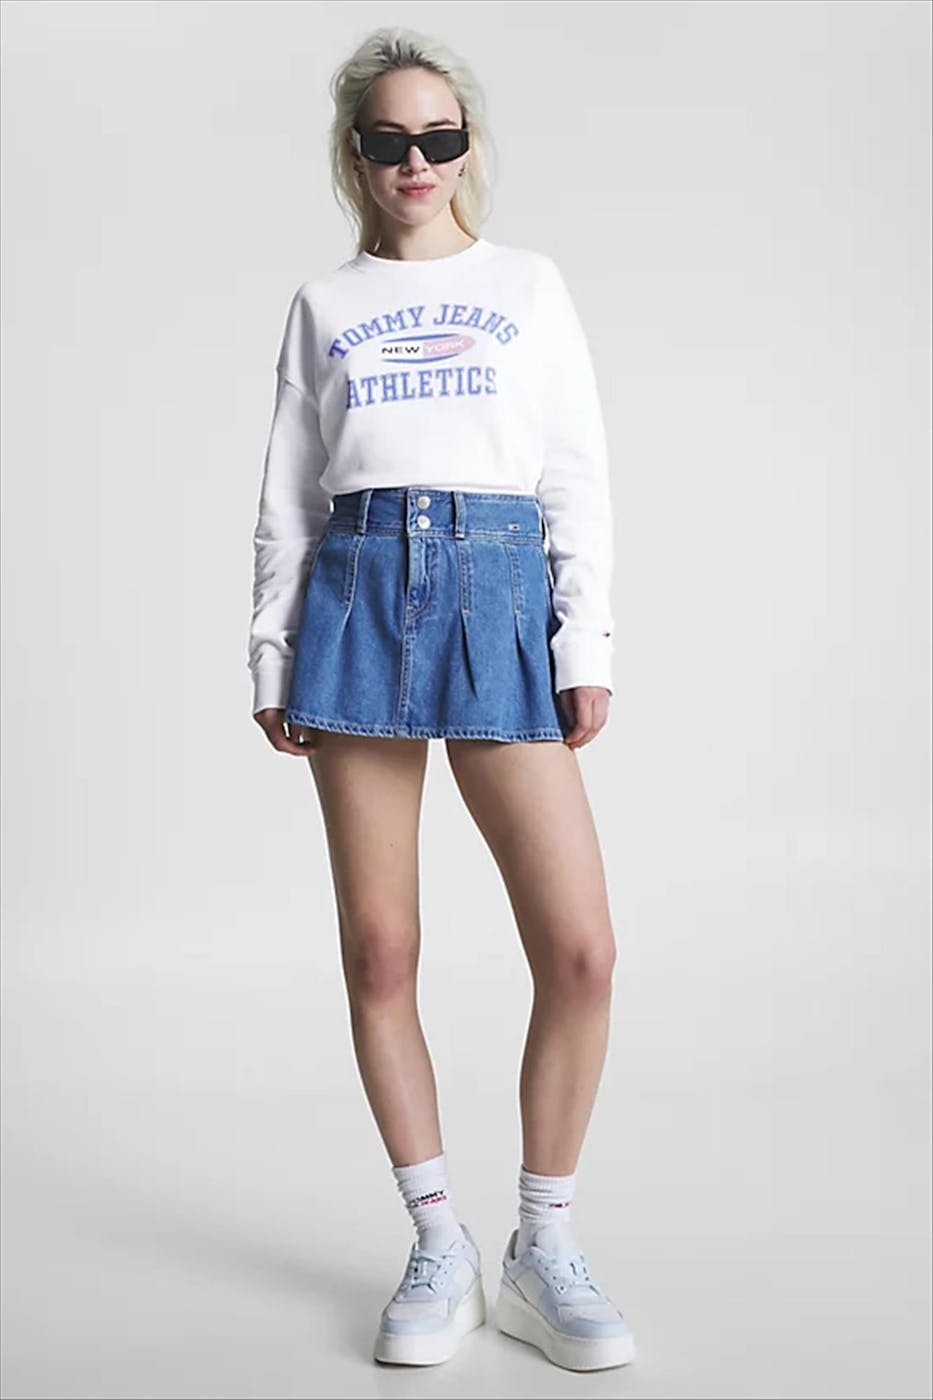 Tommy Jeans - Witte Atheltics sweater